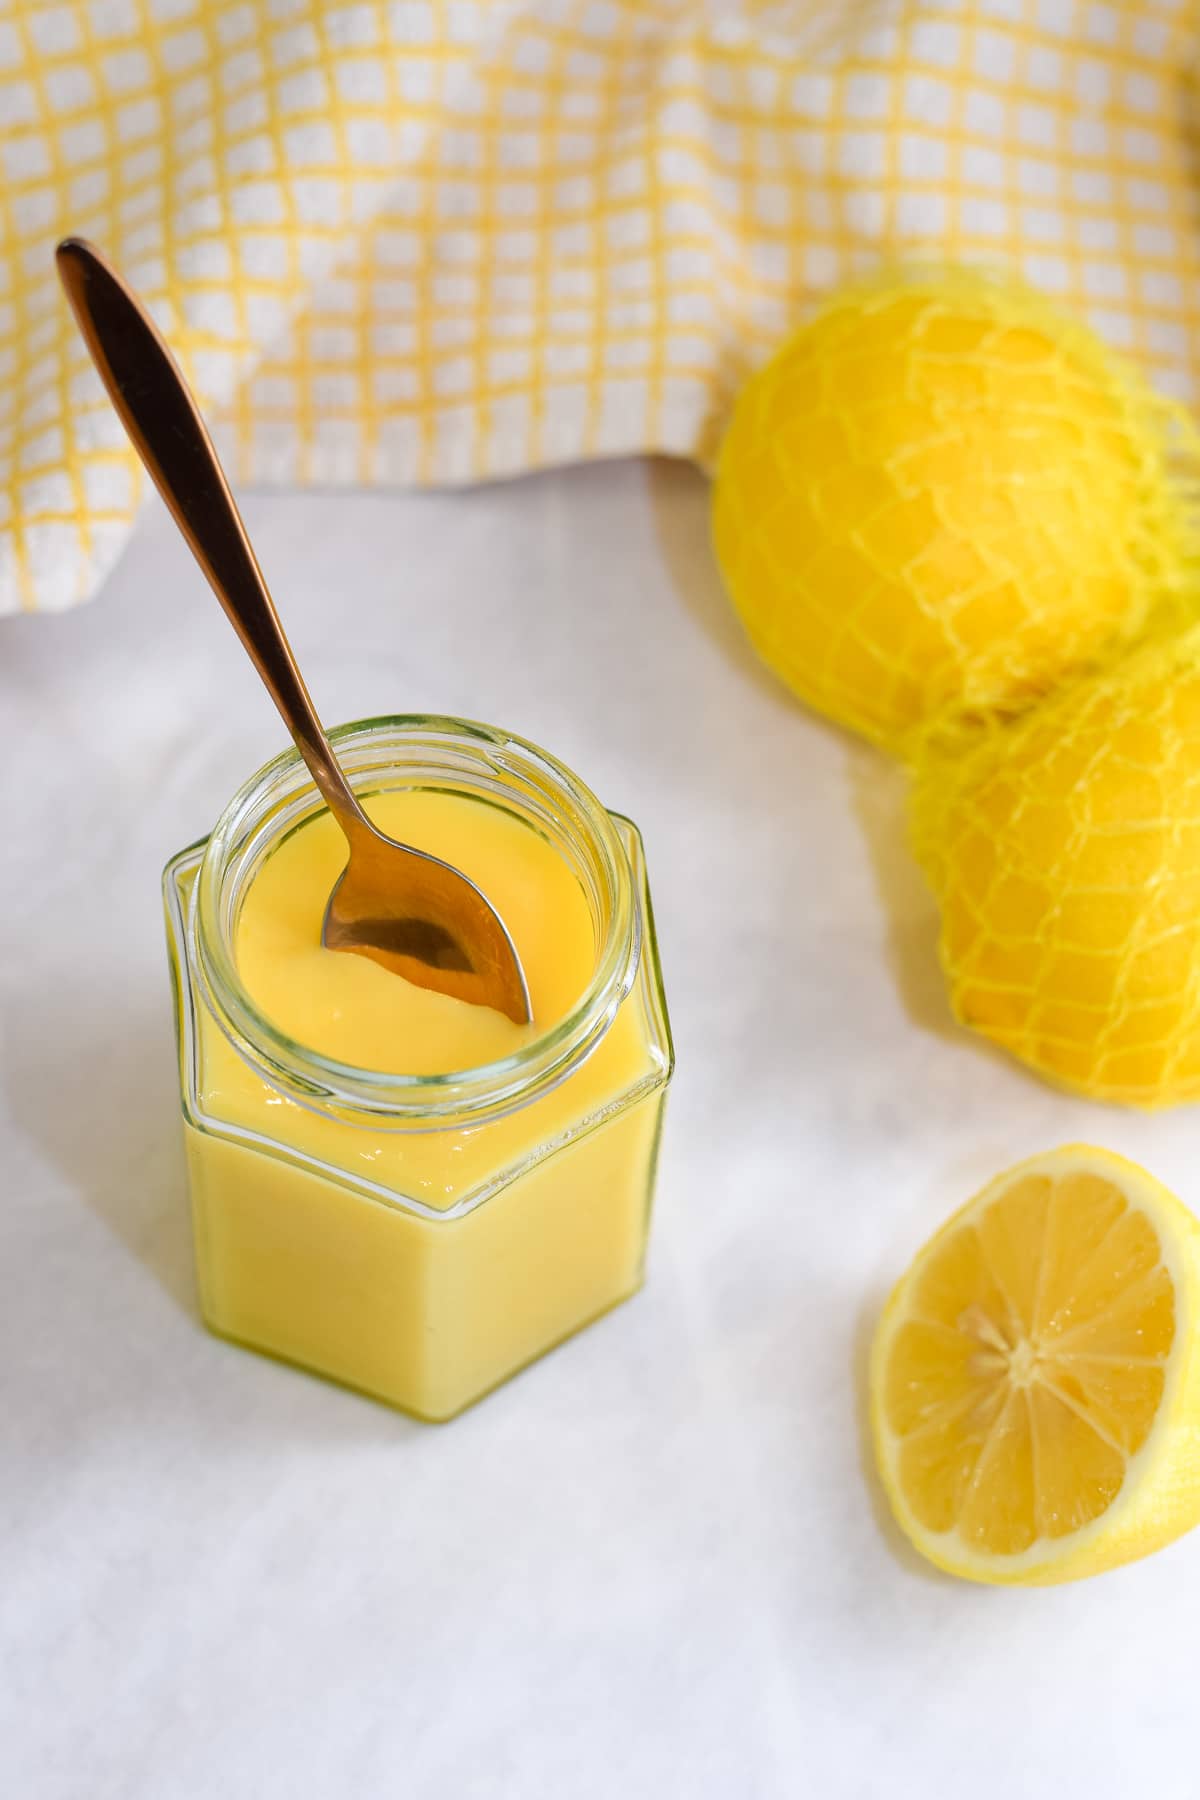 lemon cake in a jar with a spoon and lemons to the side